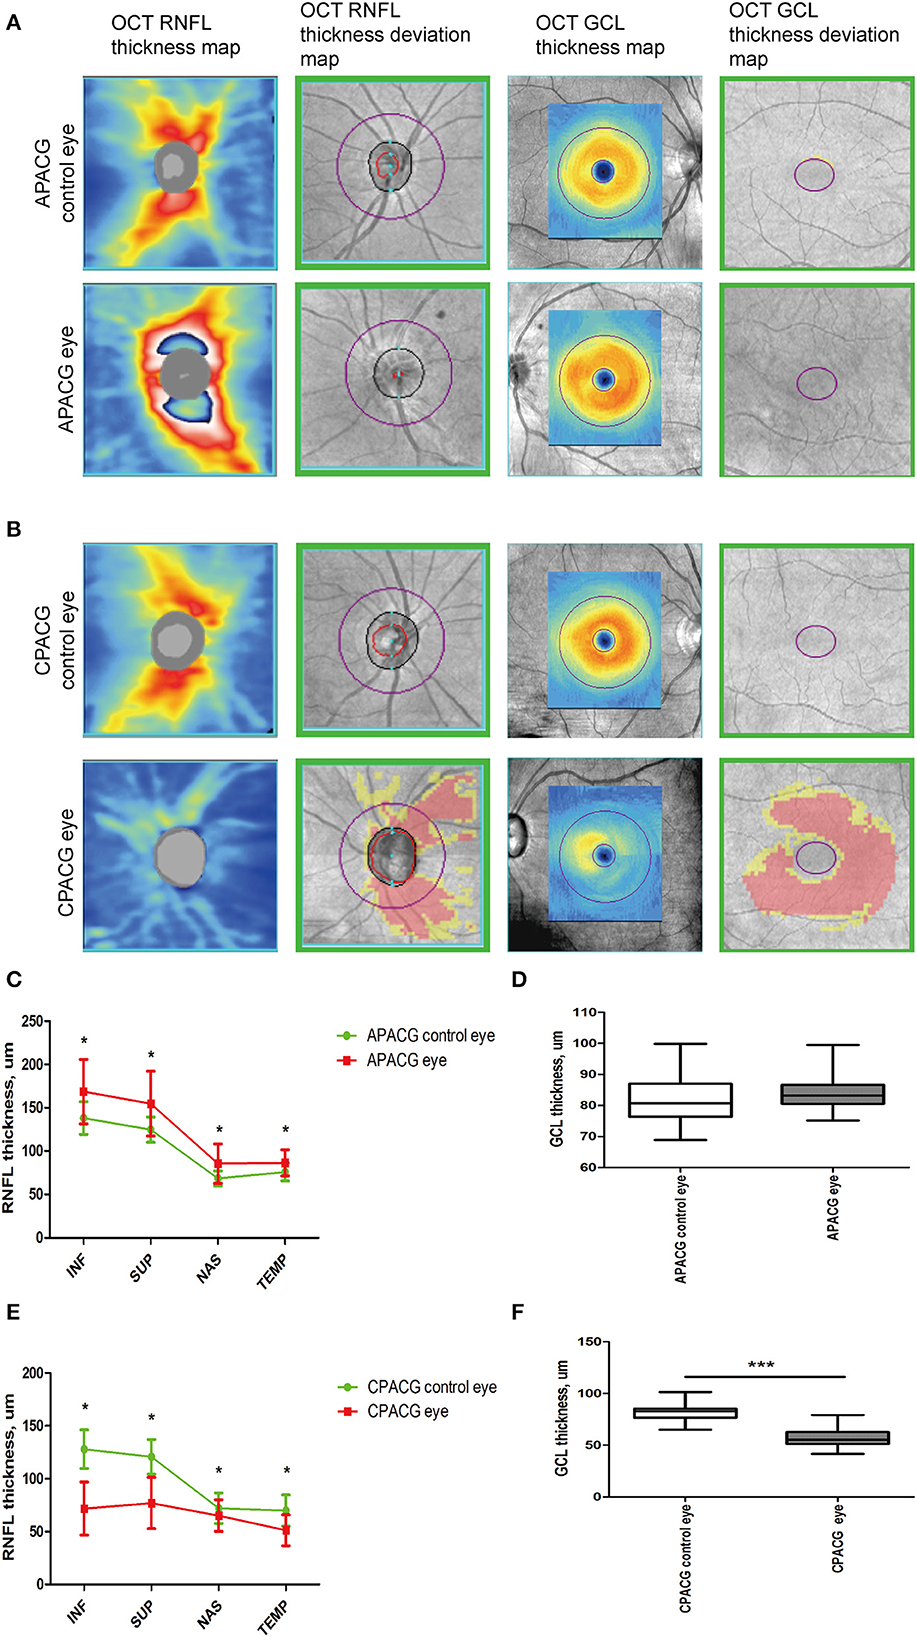 Frontiers Alteration of neurofilament heavy chain and its phosphoforms reveals early subcellular damage beyond the optic nerve head in glaucoma image